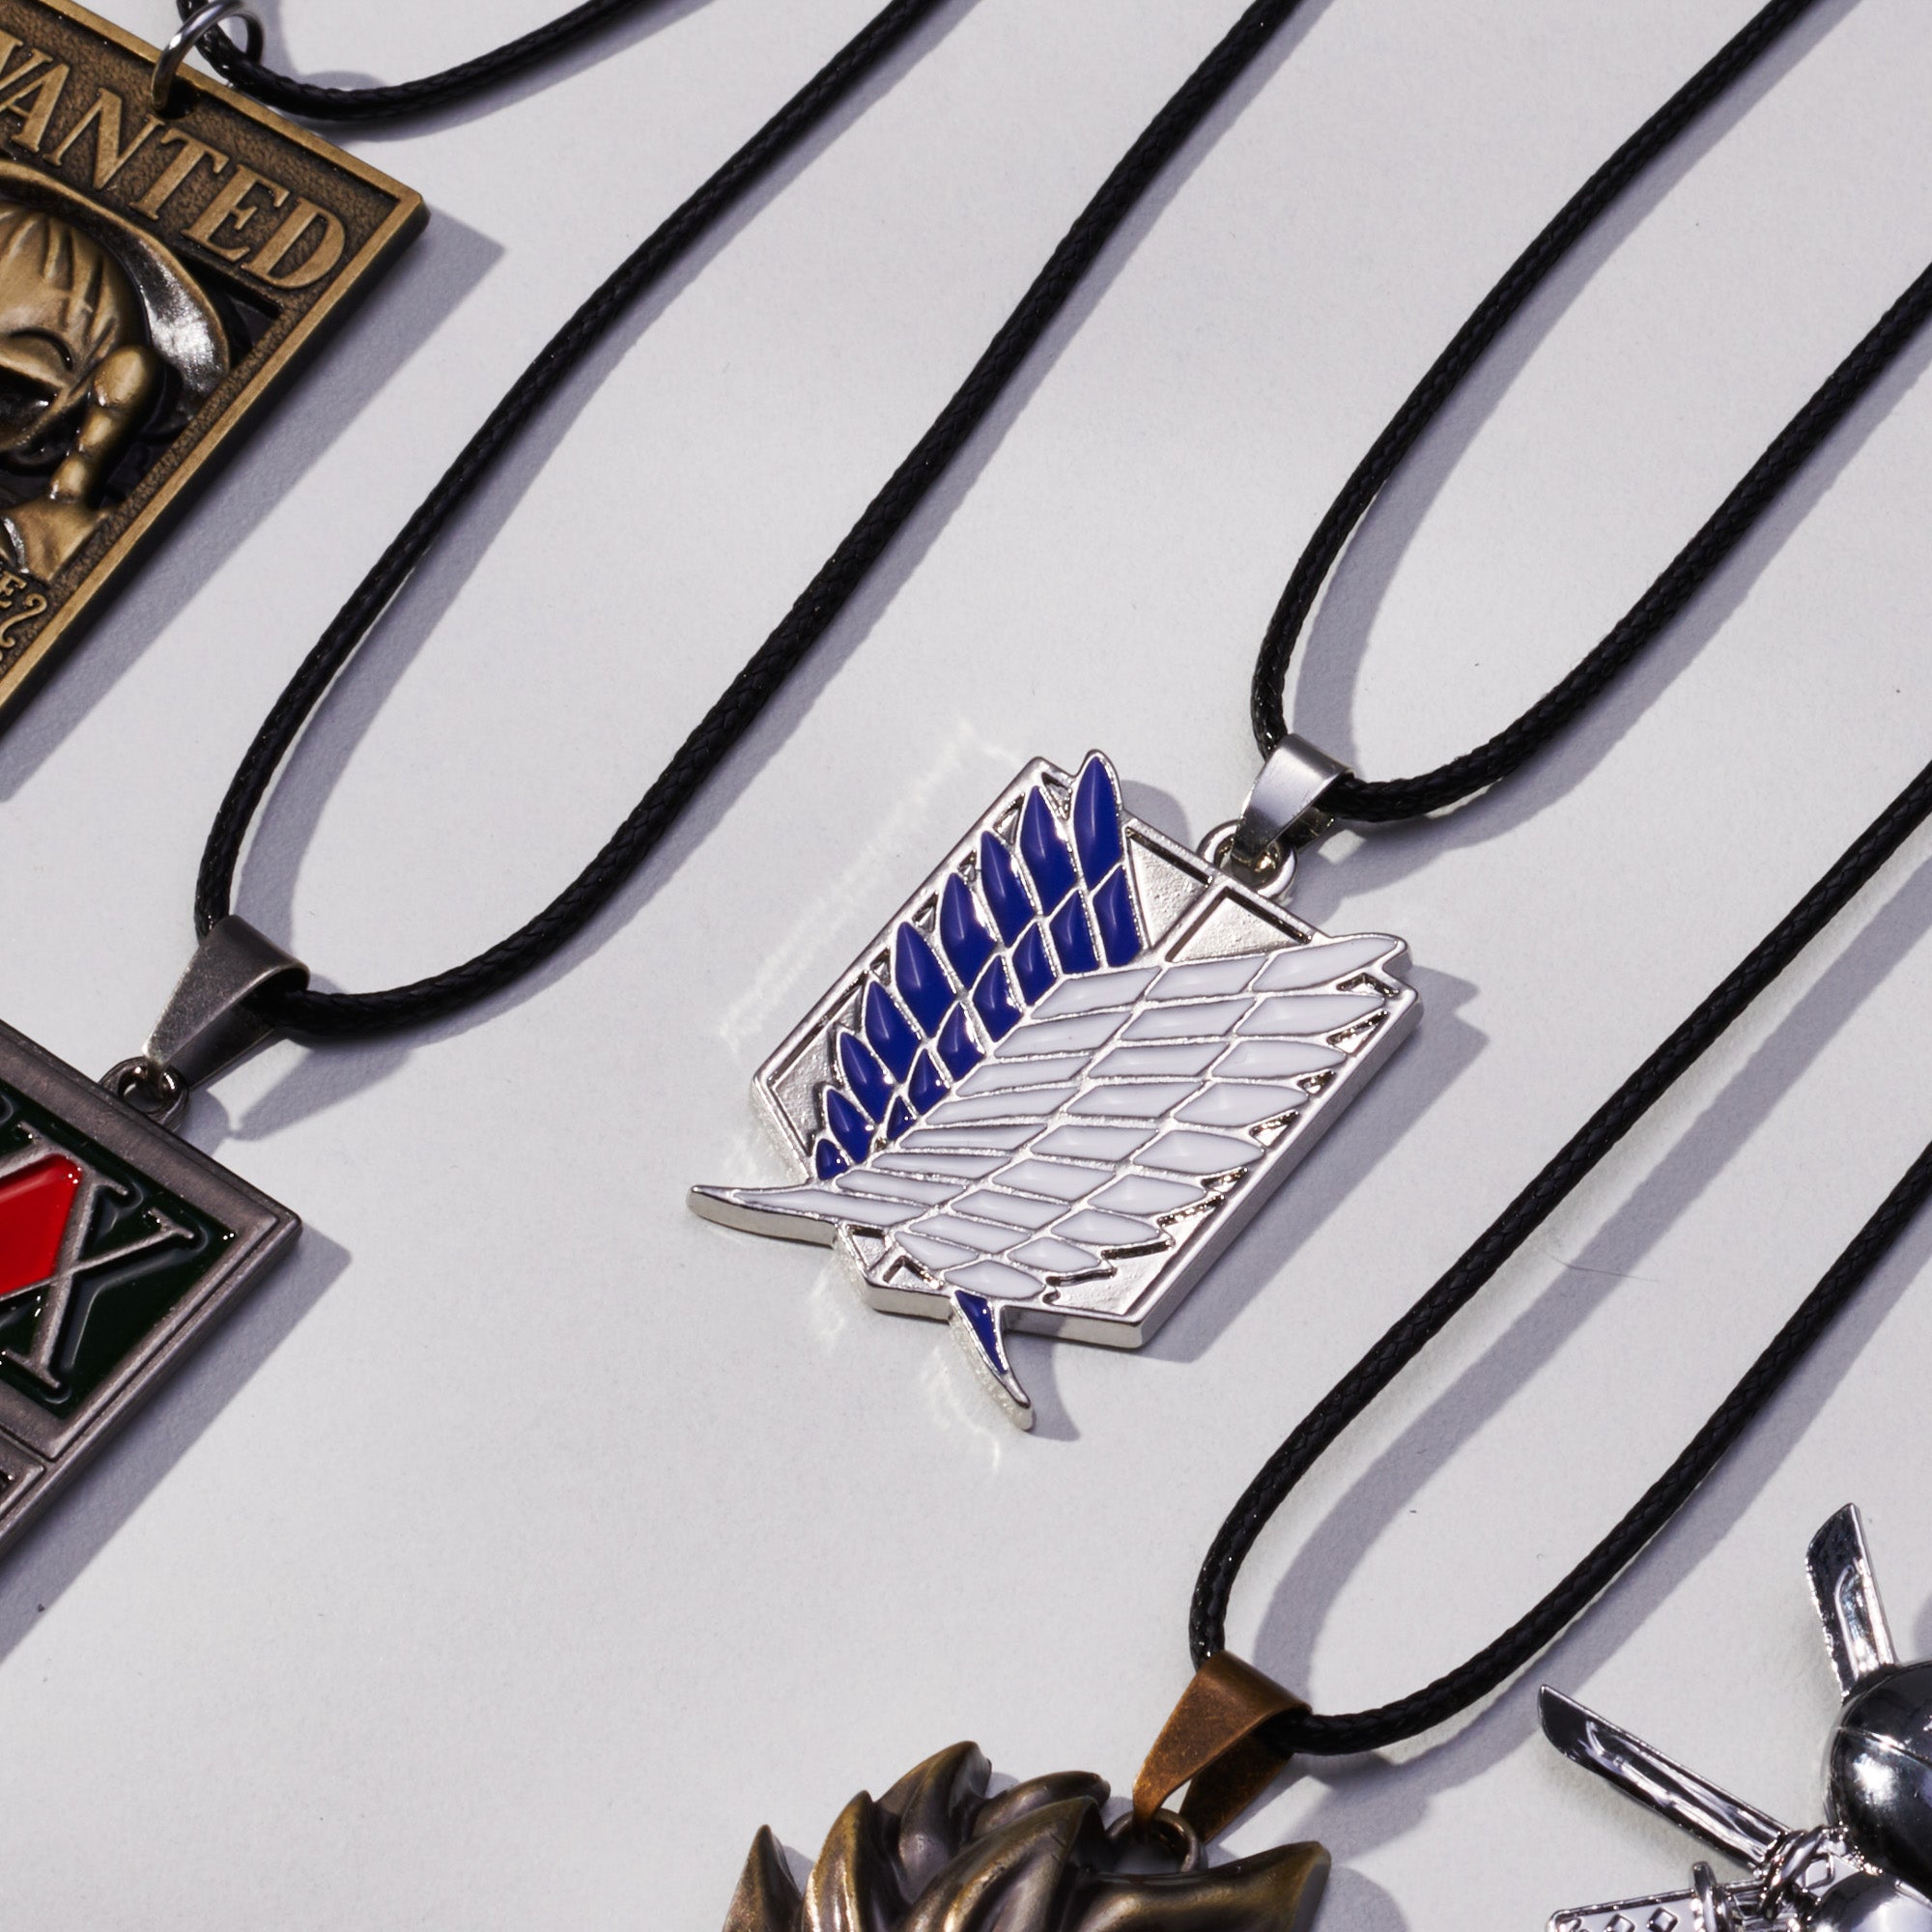 Buy Shingeki no Kyojin Attack on Titan Cosplay Scouting Legion Necklace  Blue Online at Low Prices in India - Amazon.in